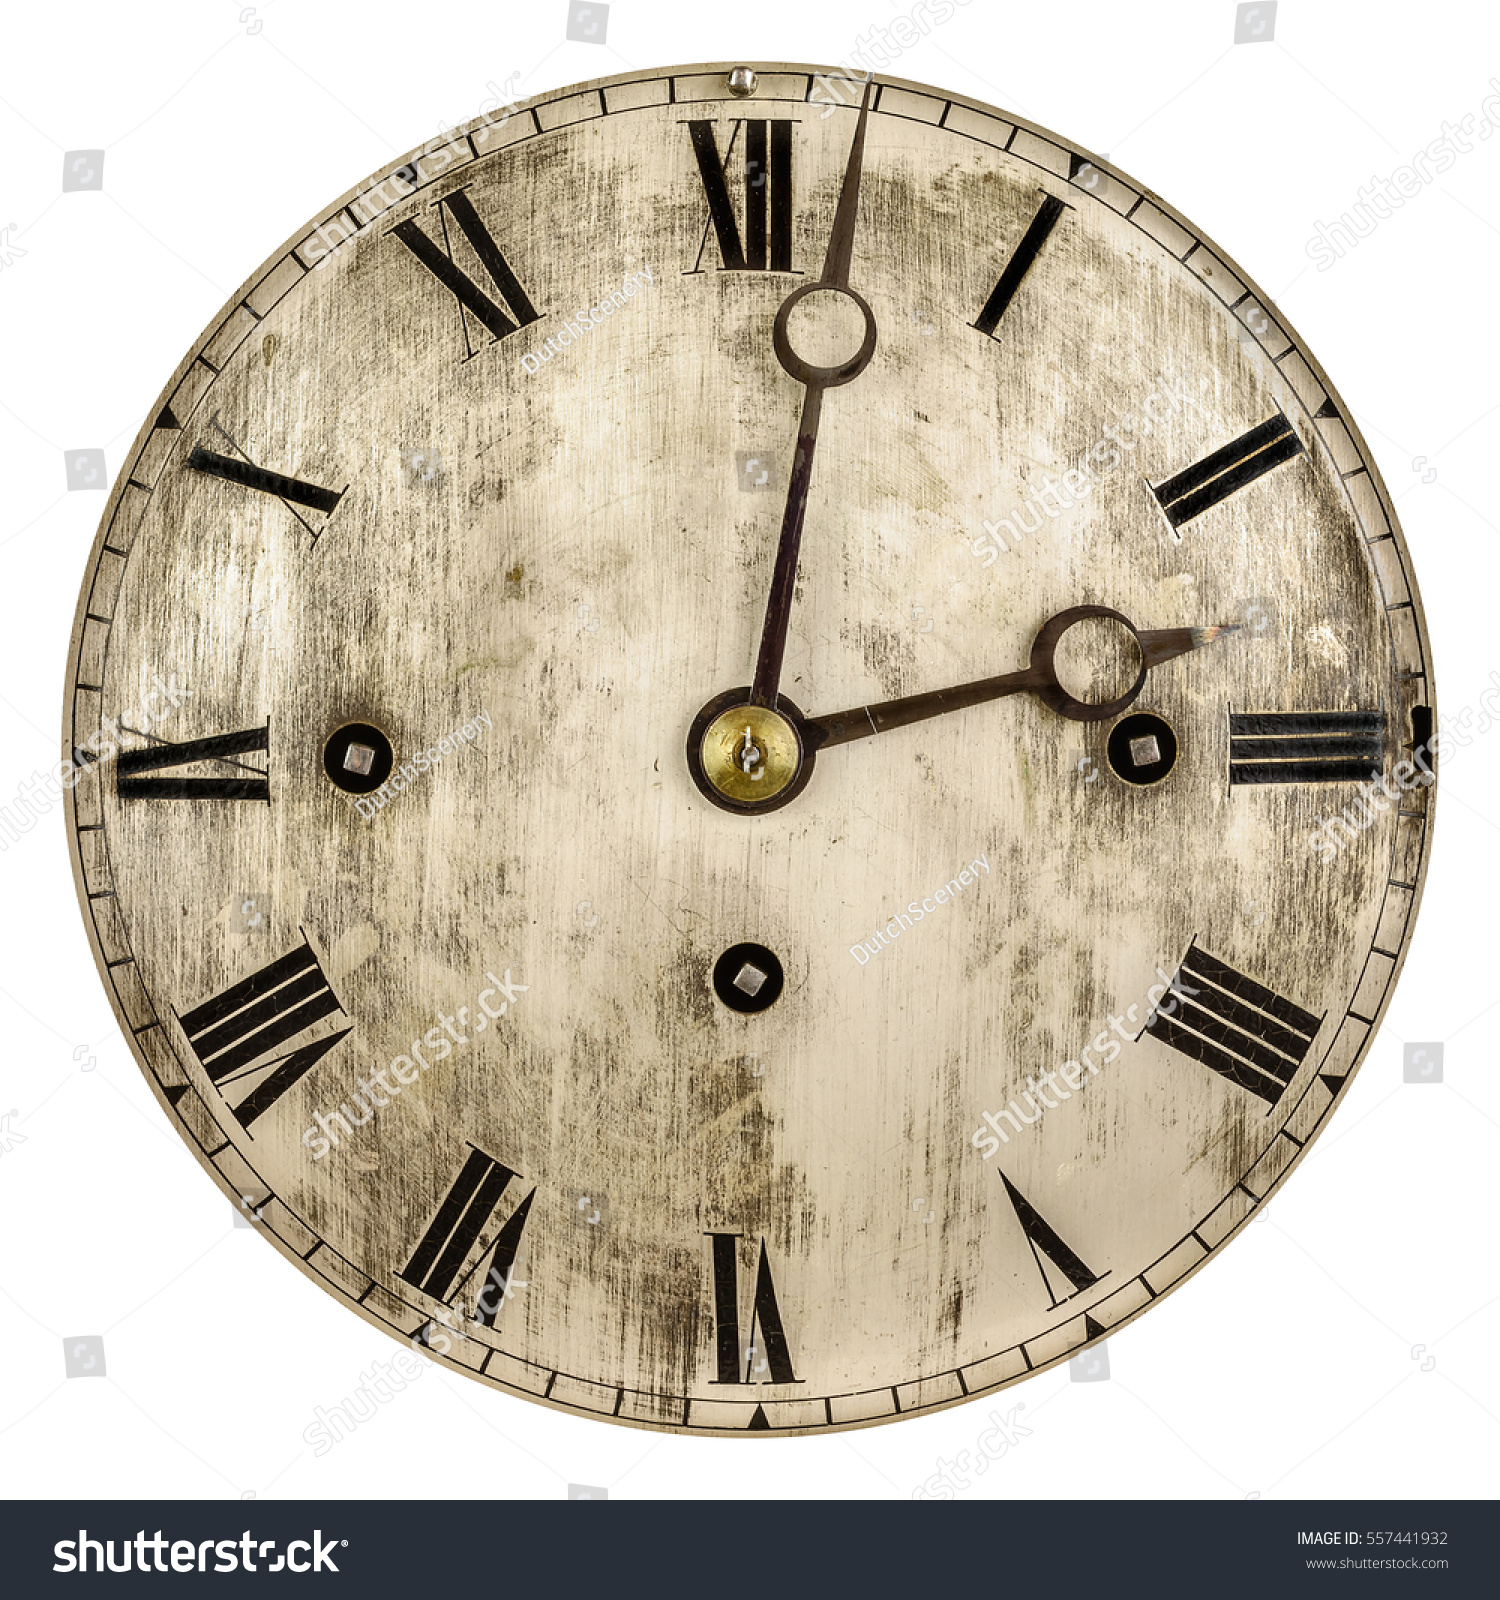 Sepia Toned Image Old Clock Face Stock Photo 557441932 - Shutterstock